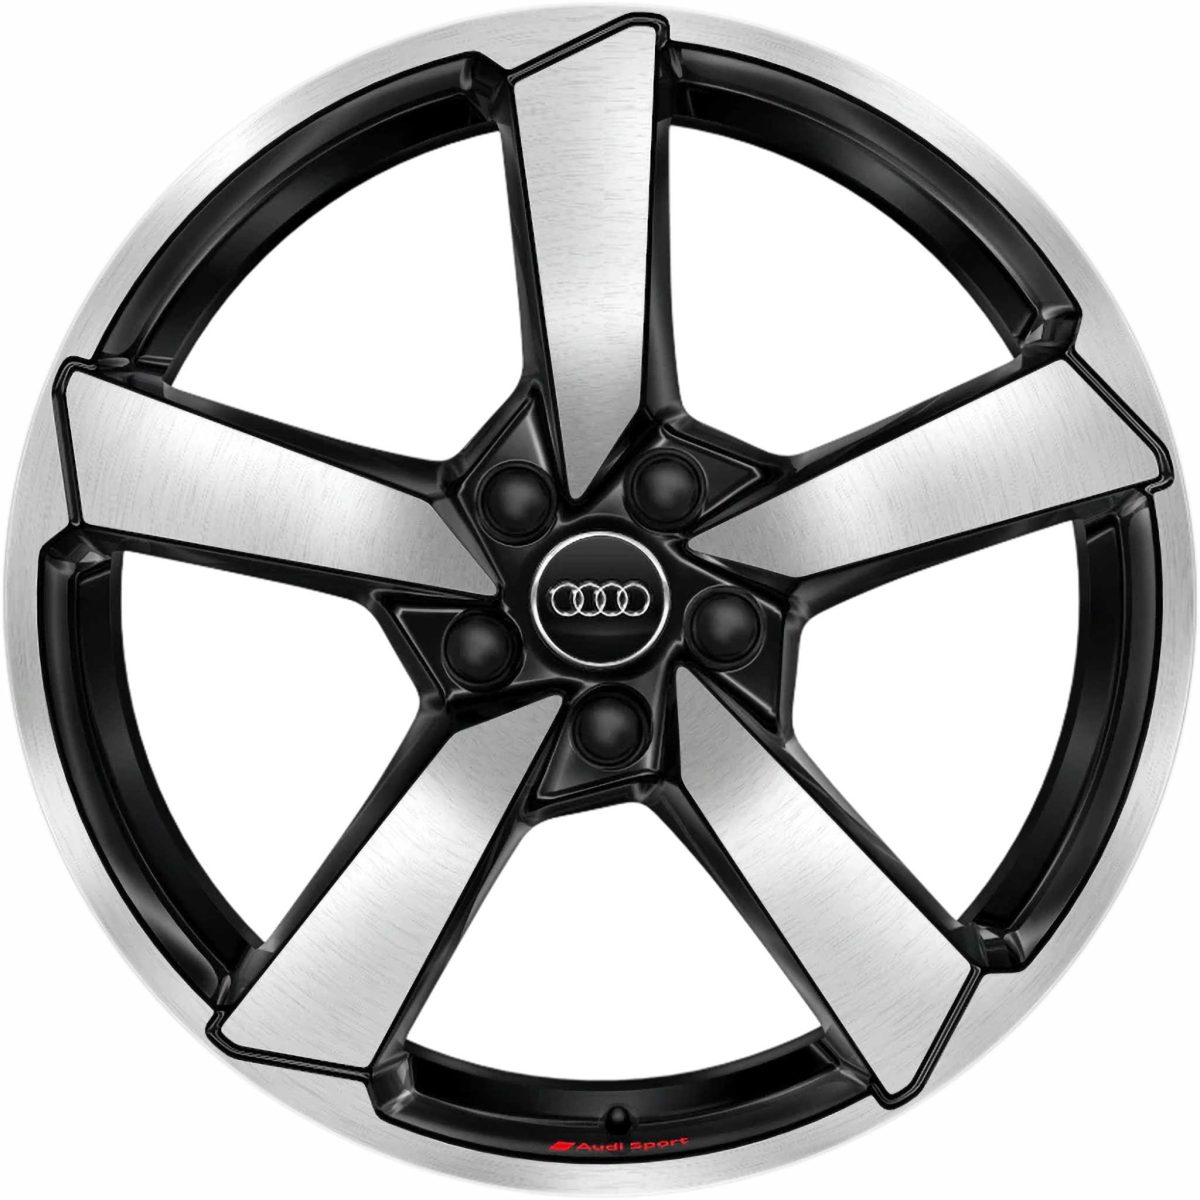 Genuine Audi A5 8W 5 Spoke Cutter 19" Inch Alloy Wheels with Black and Diamond Turned Finish 8W0 601 025 FS